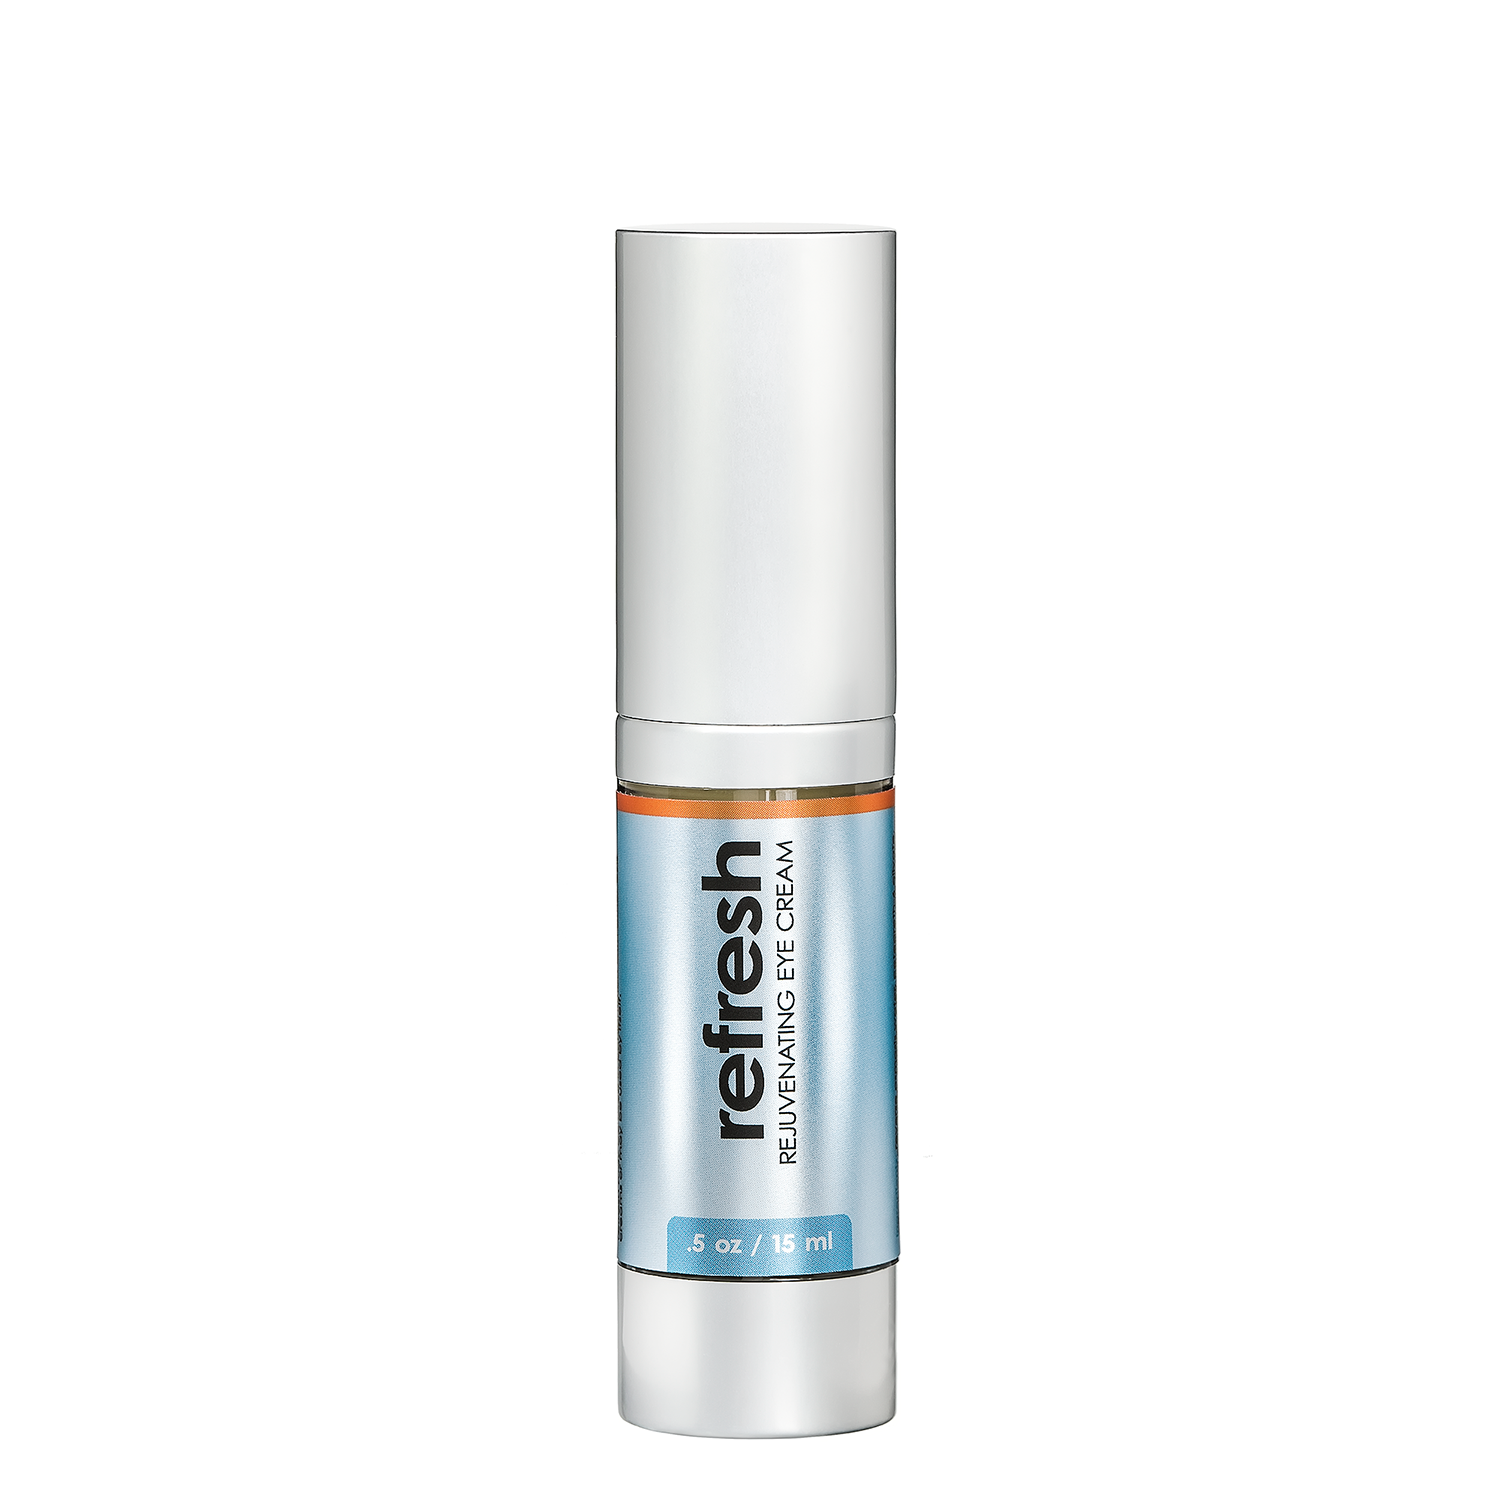 Bottle of Refresh Eye Cream by Your Best Face Skincare